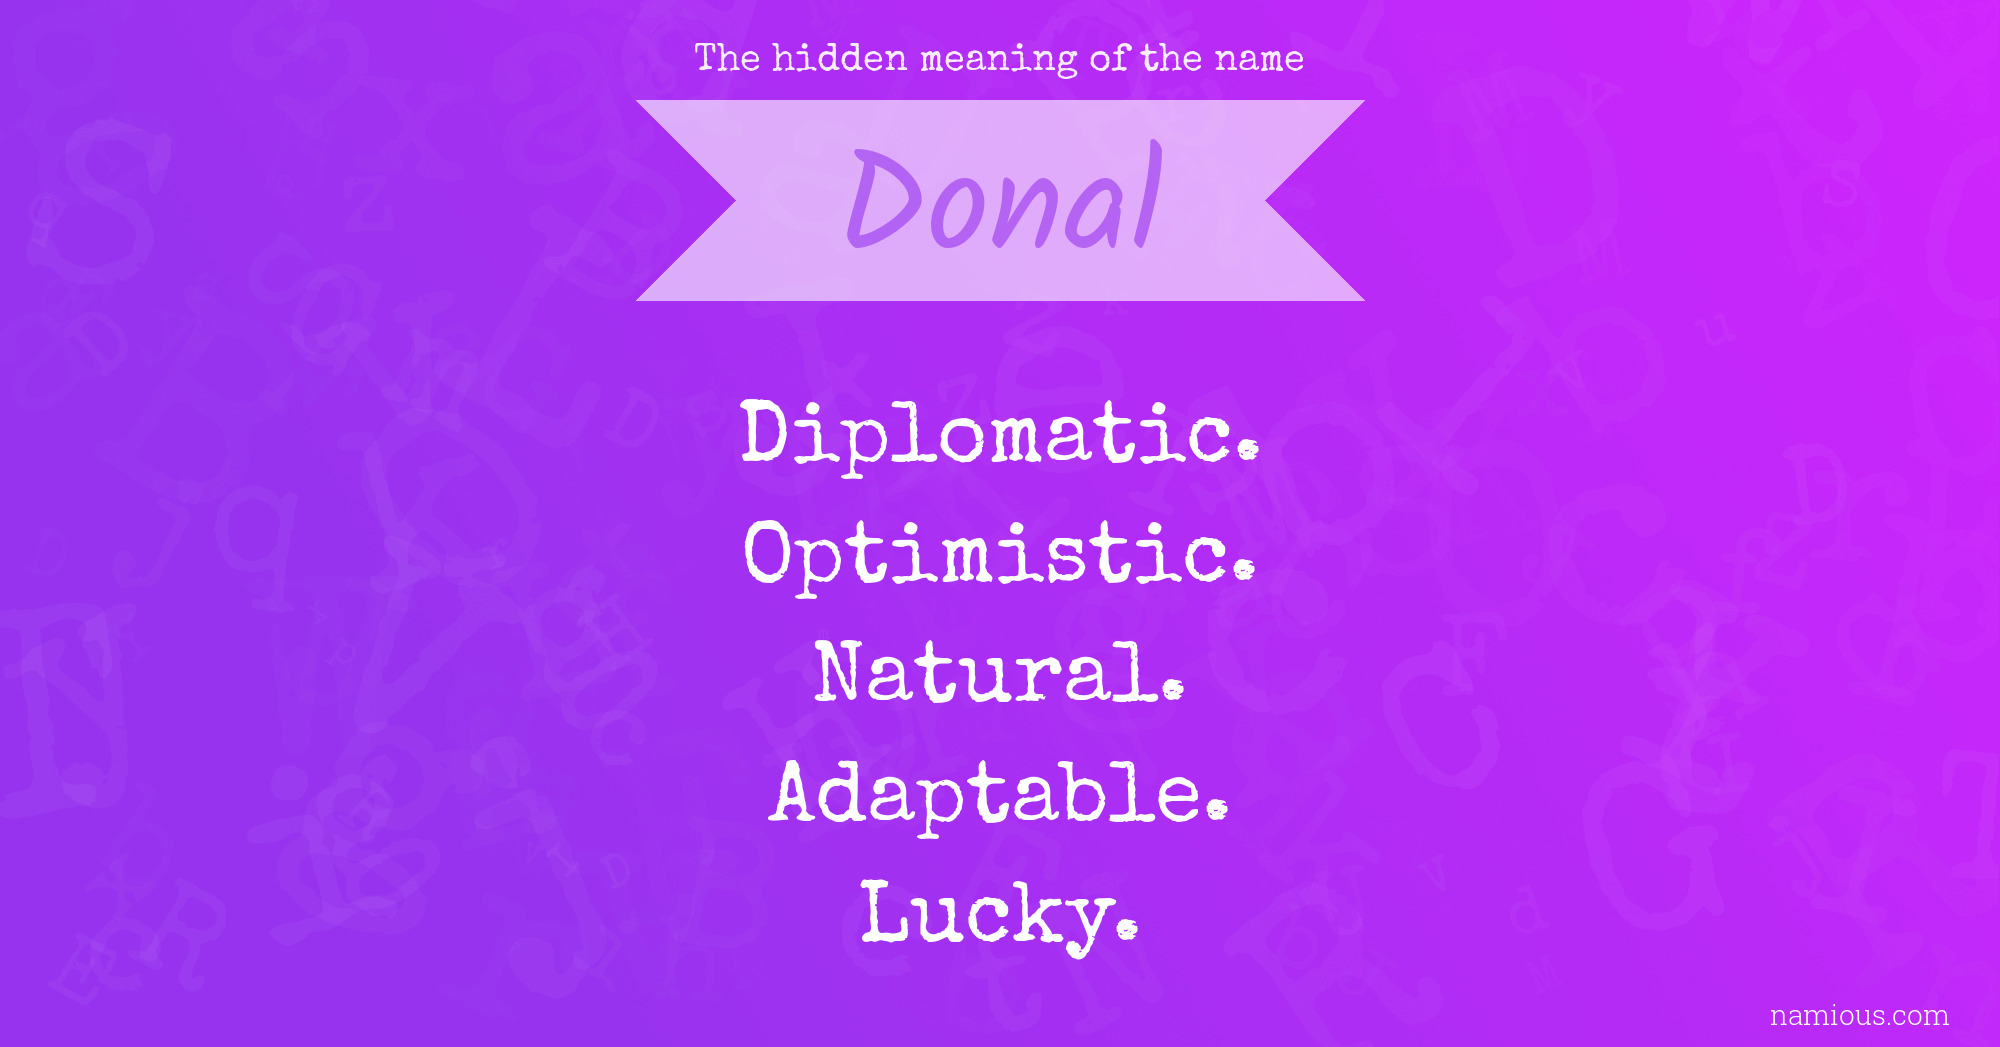 The hidden meaning of the name Donal